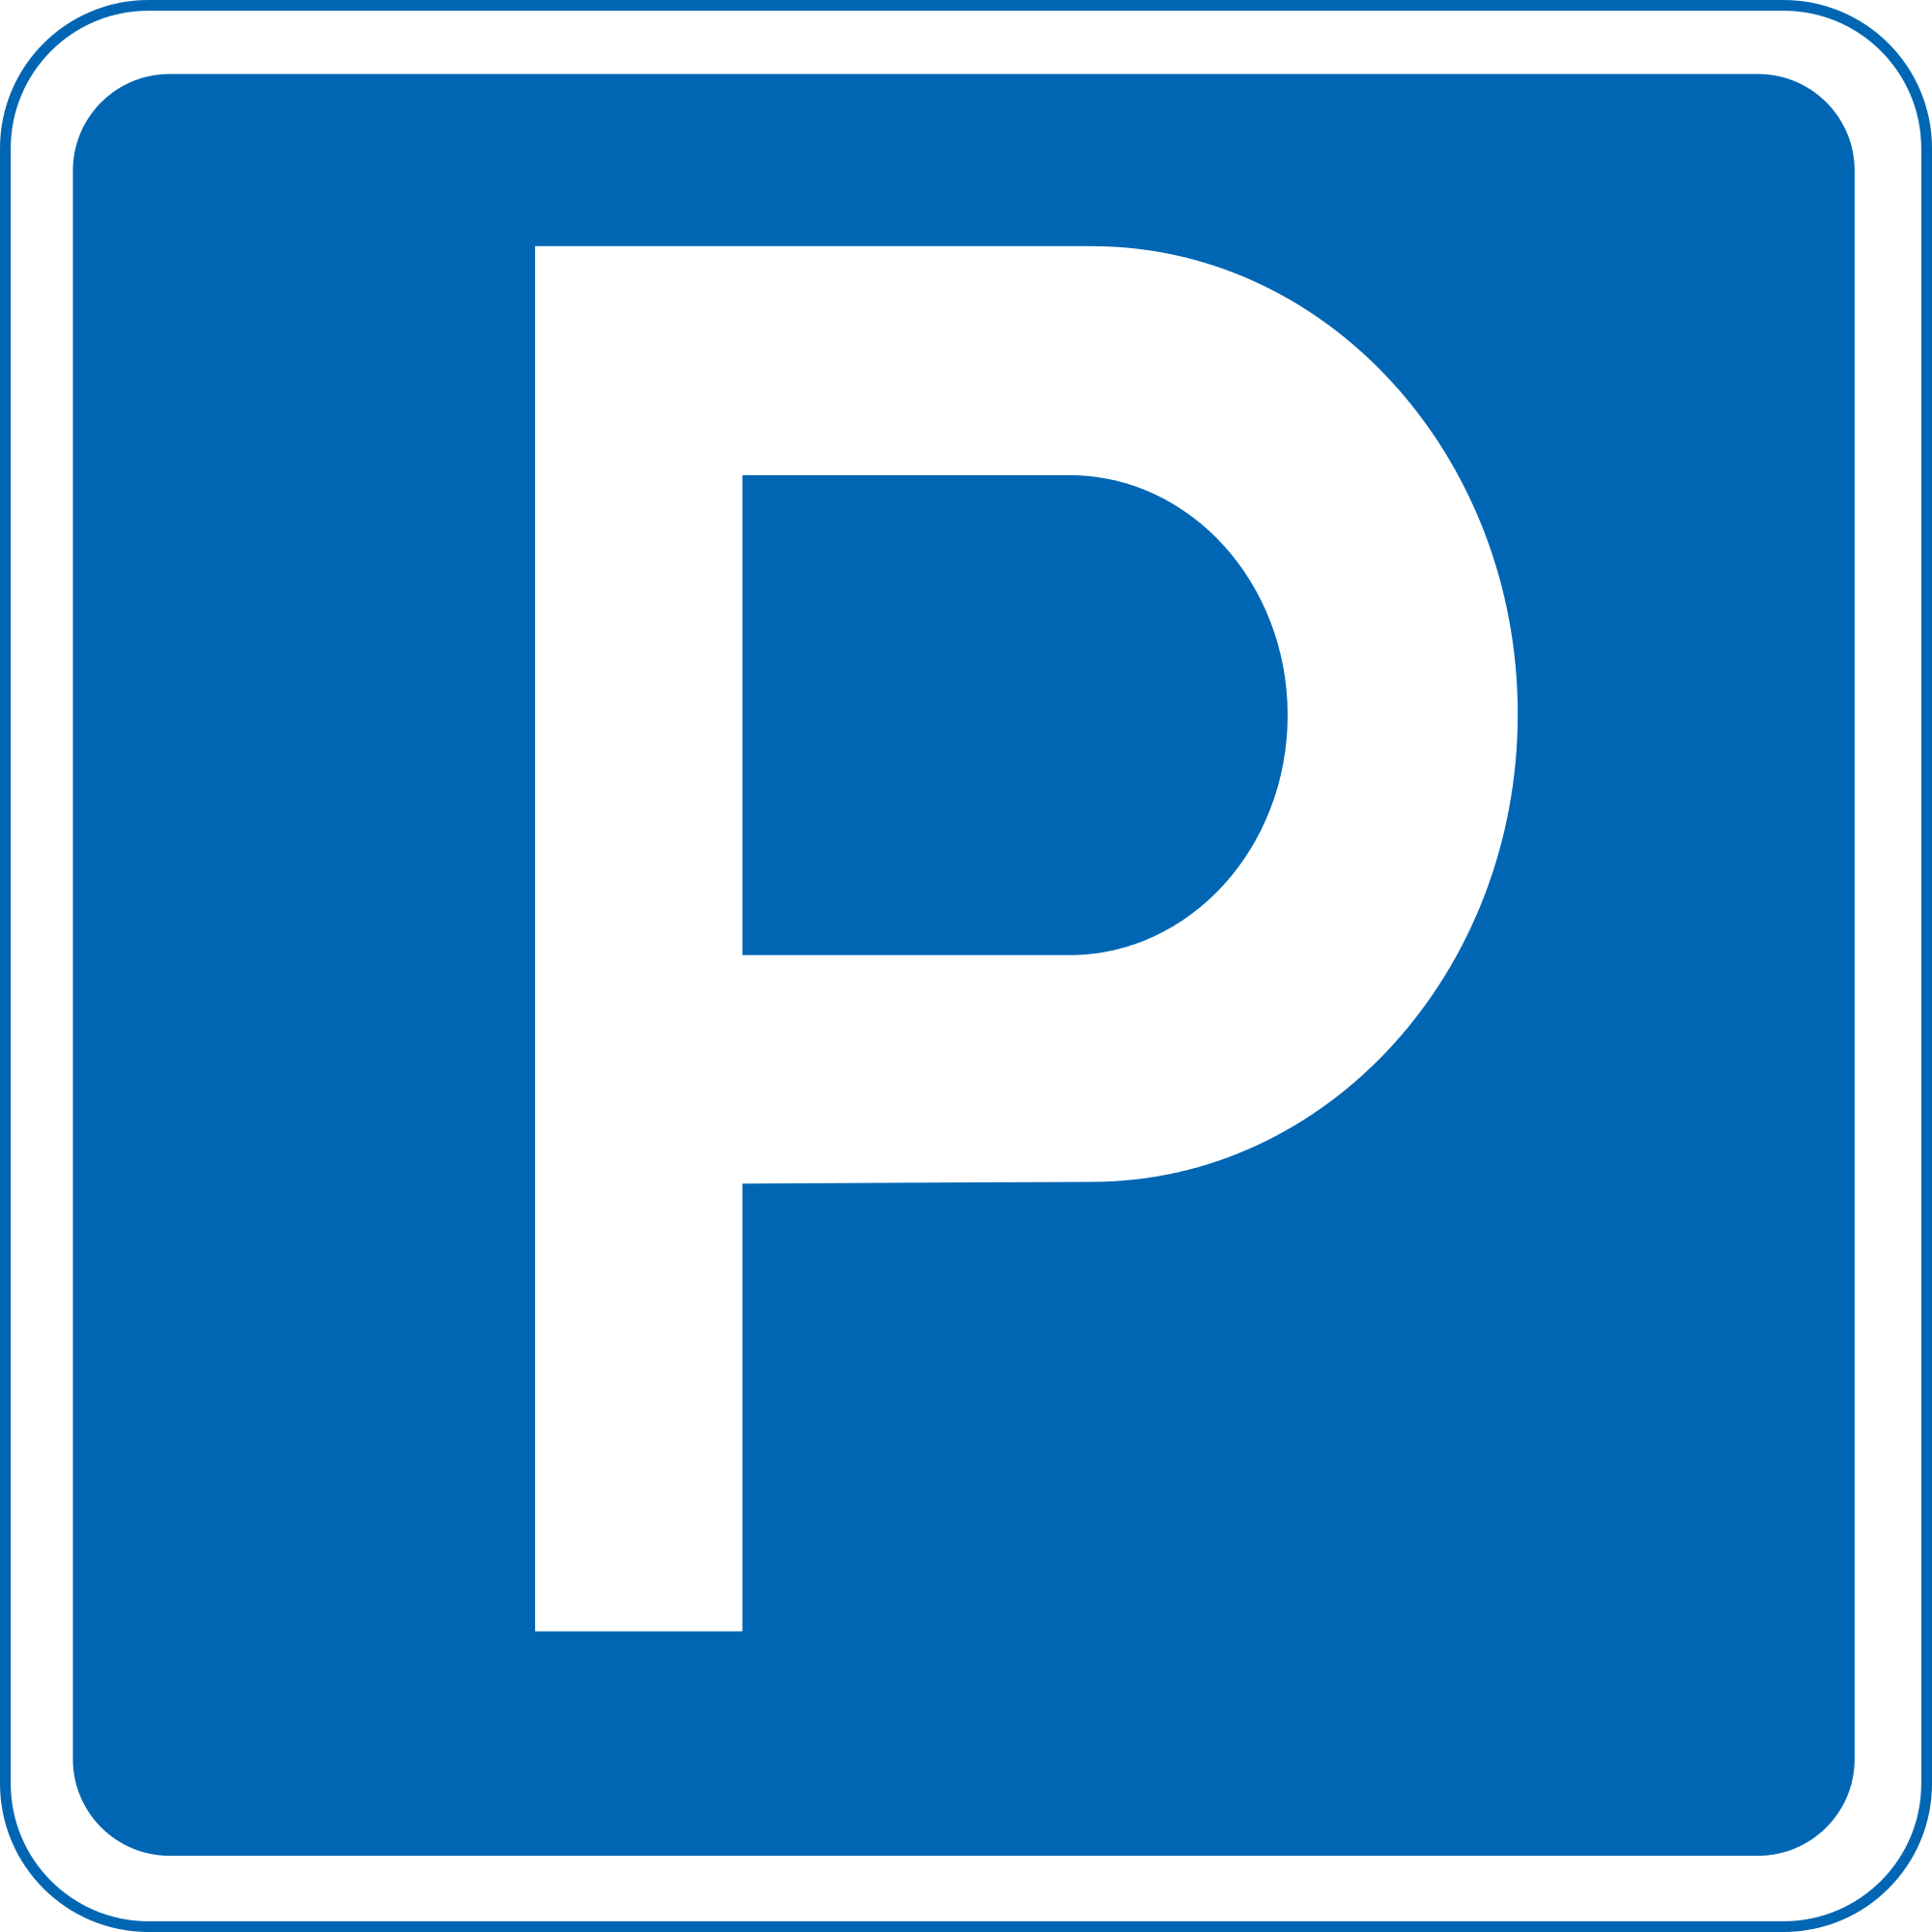 File:Japanese Road sign (Parking lot A, Parking permitted).svg ...